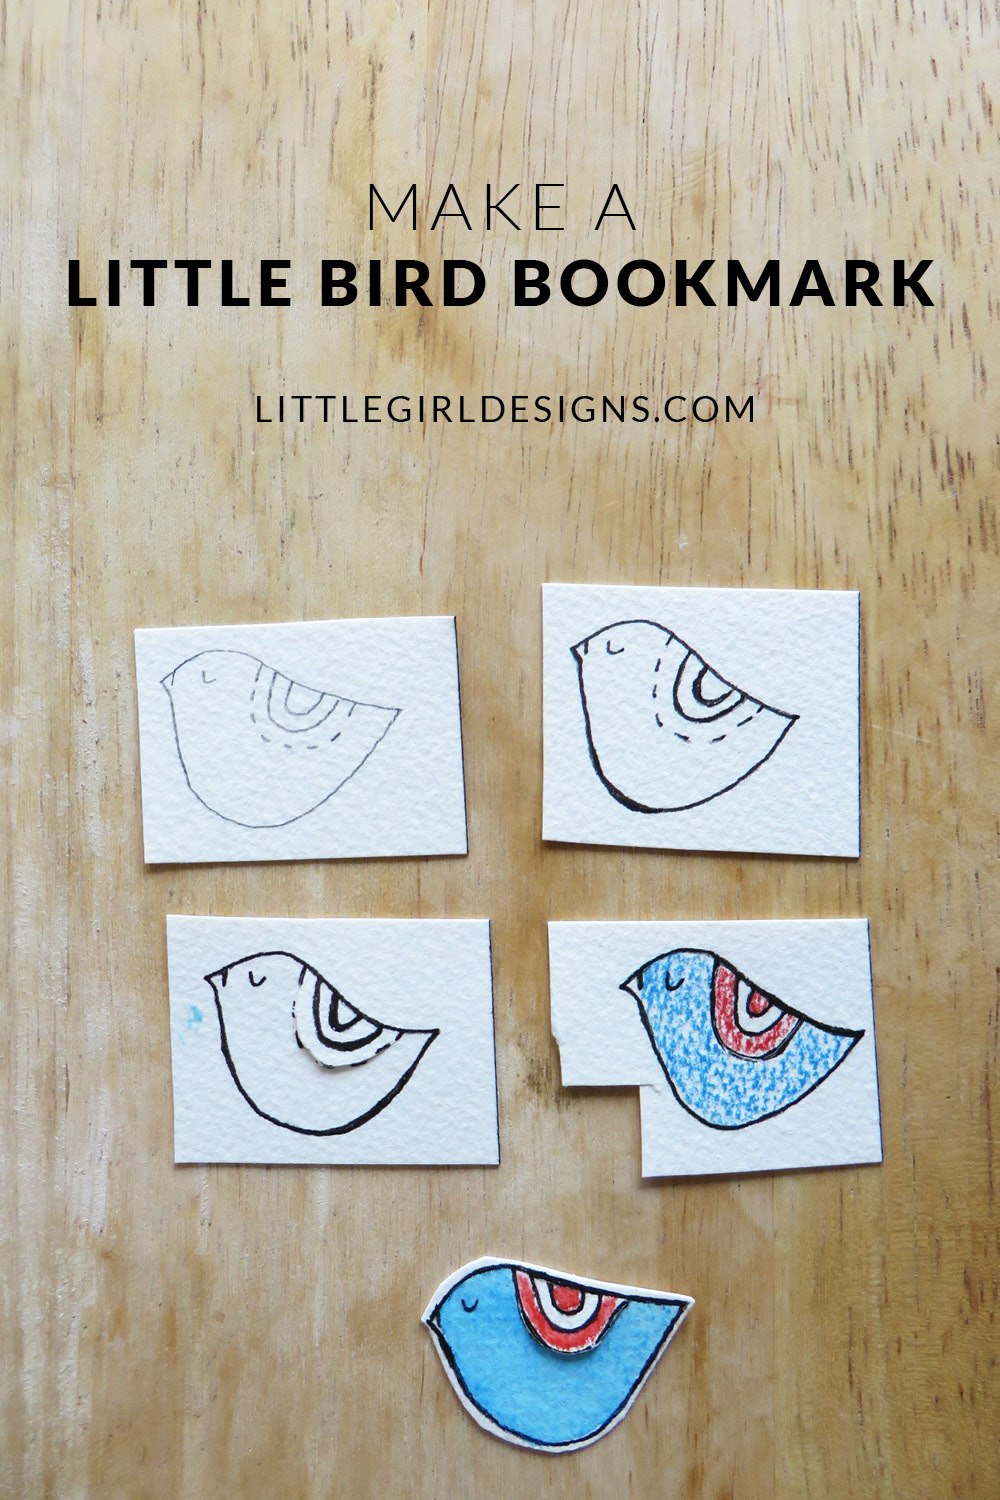 How to Make a Little Bird Bookmark - Have a scrap of watercolor paper? You can whip up several of these sweet bookmarks in no time at all. Makes a great gift for a book lover! via littlegirldesigns.com